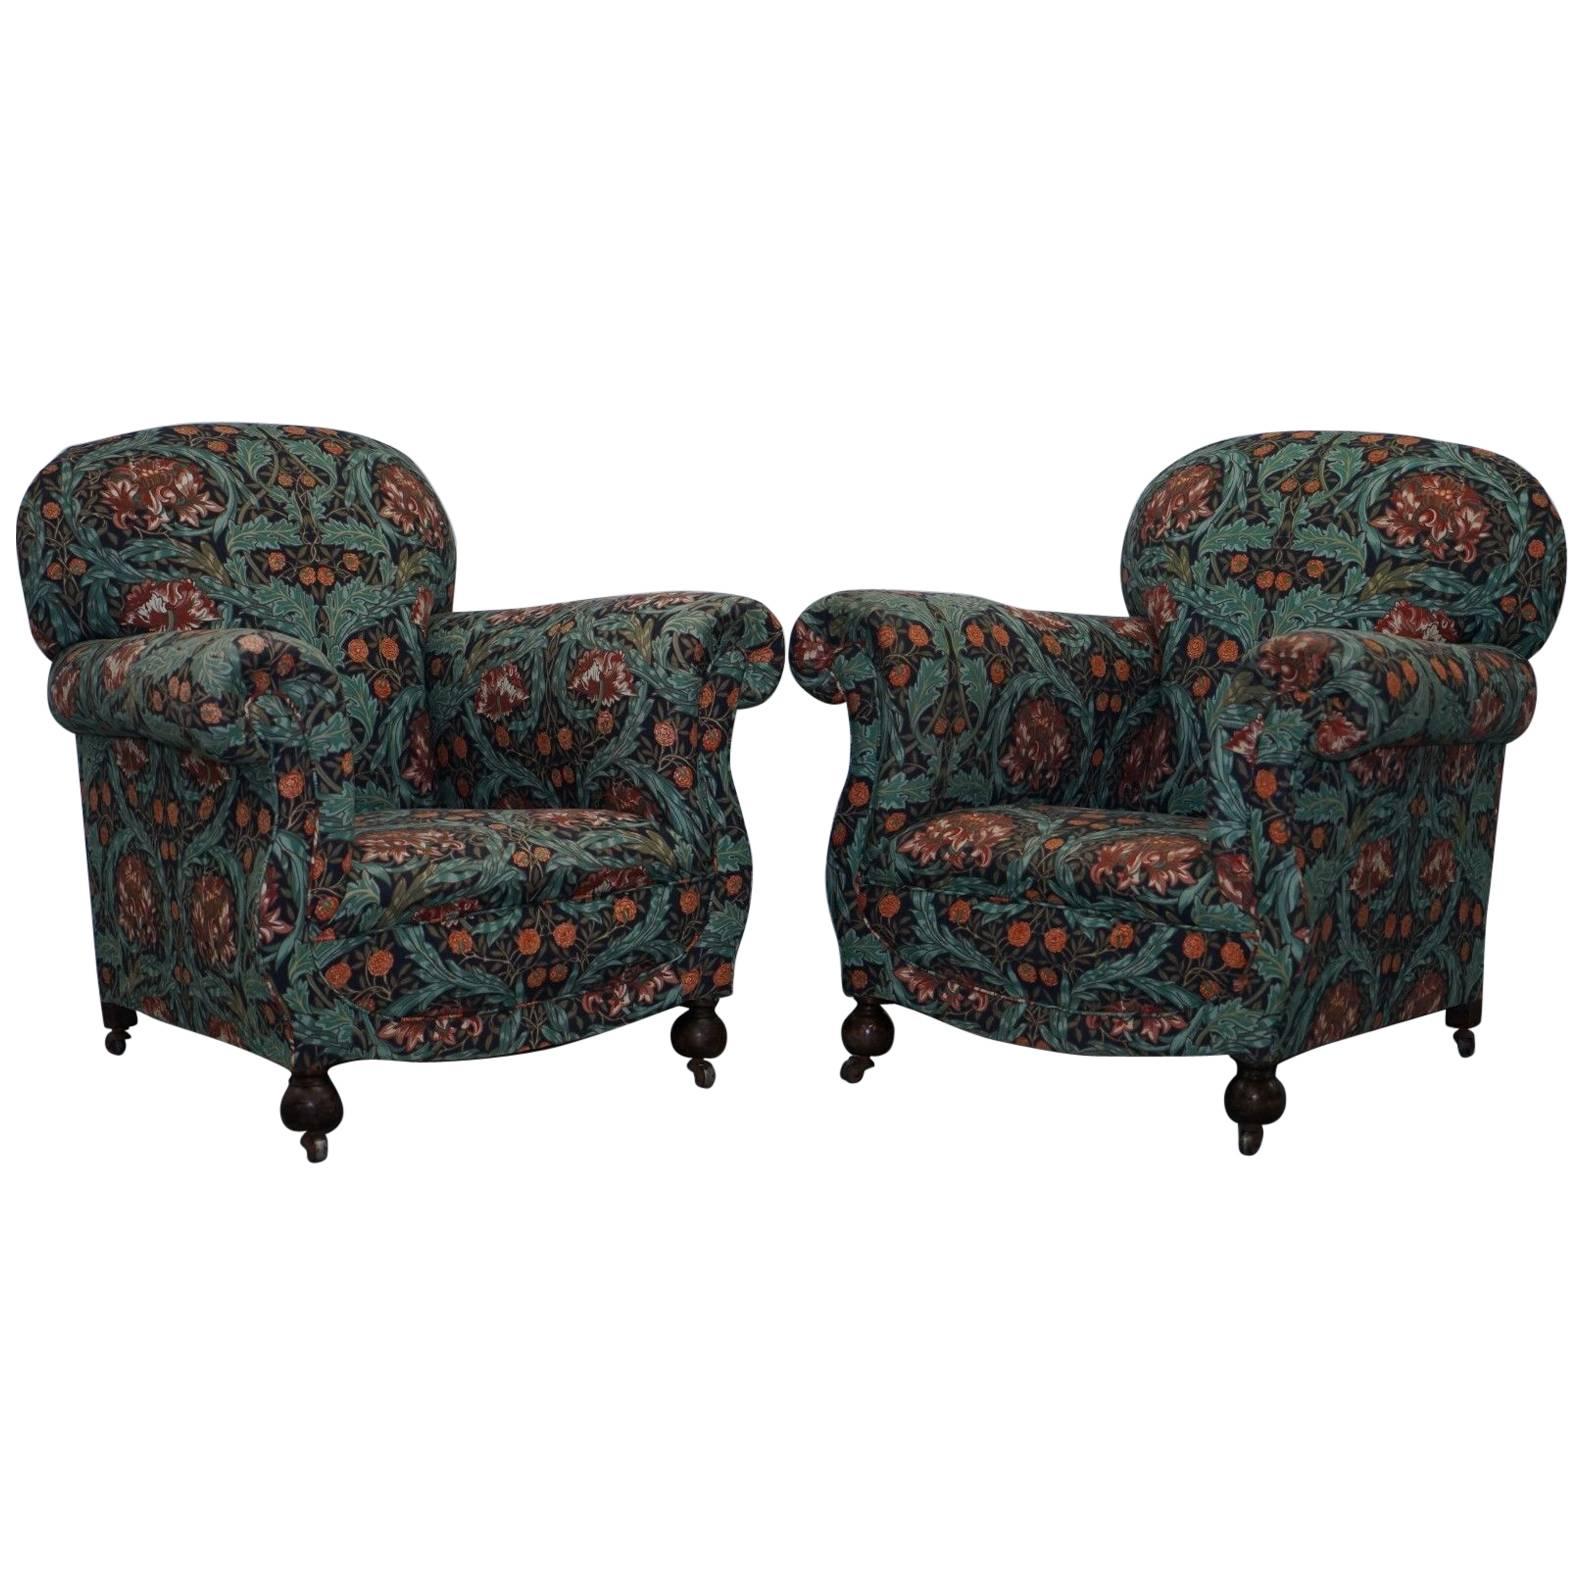 Pair of Victorian Club Armchairs in William Morris Upholstery Fabric Part Suite